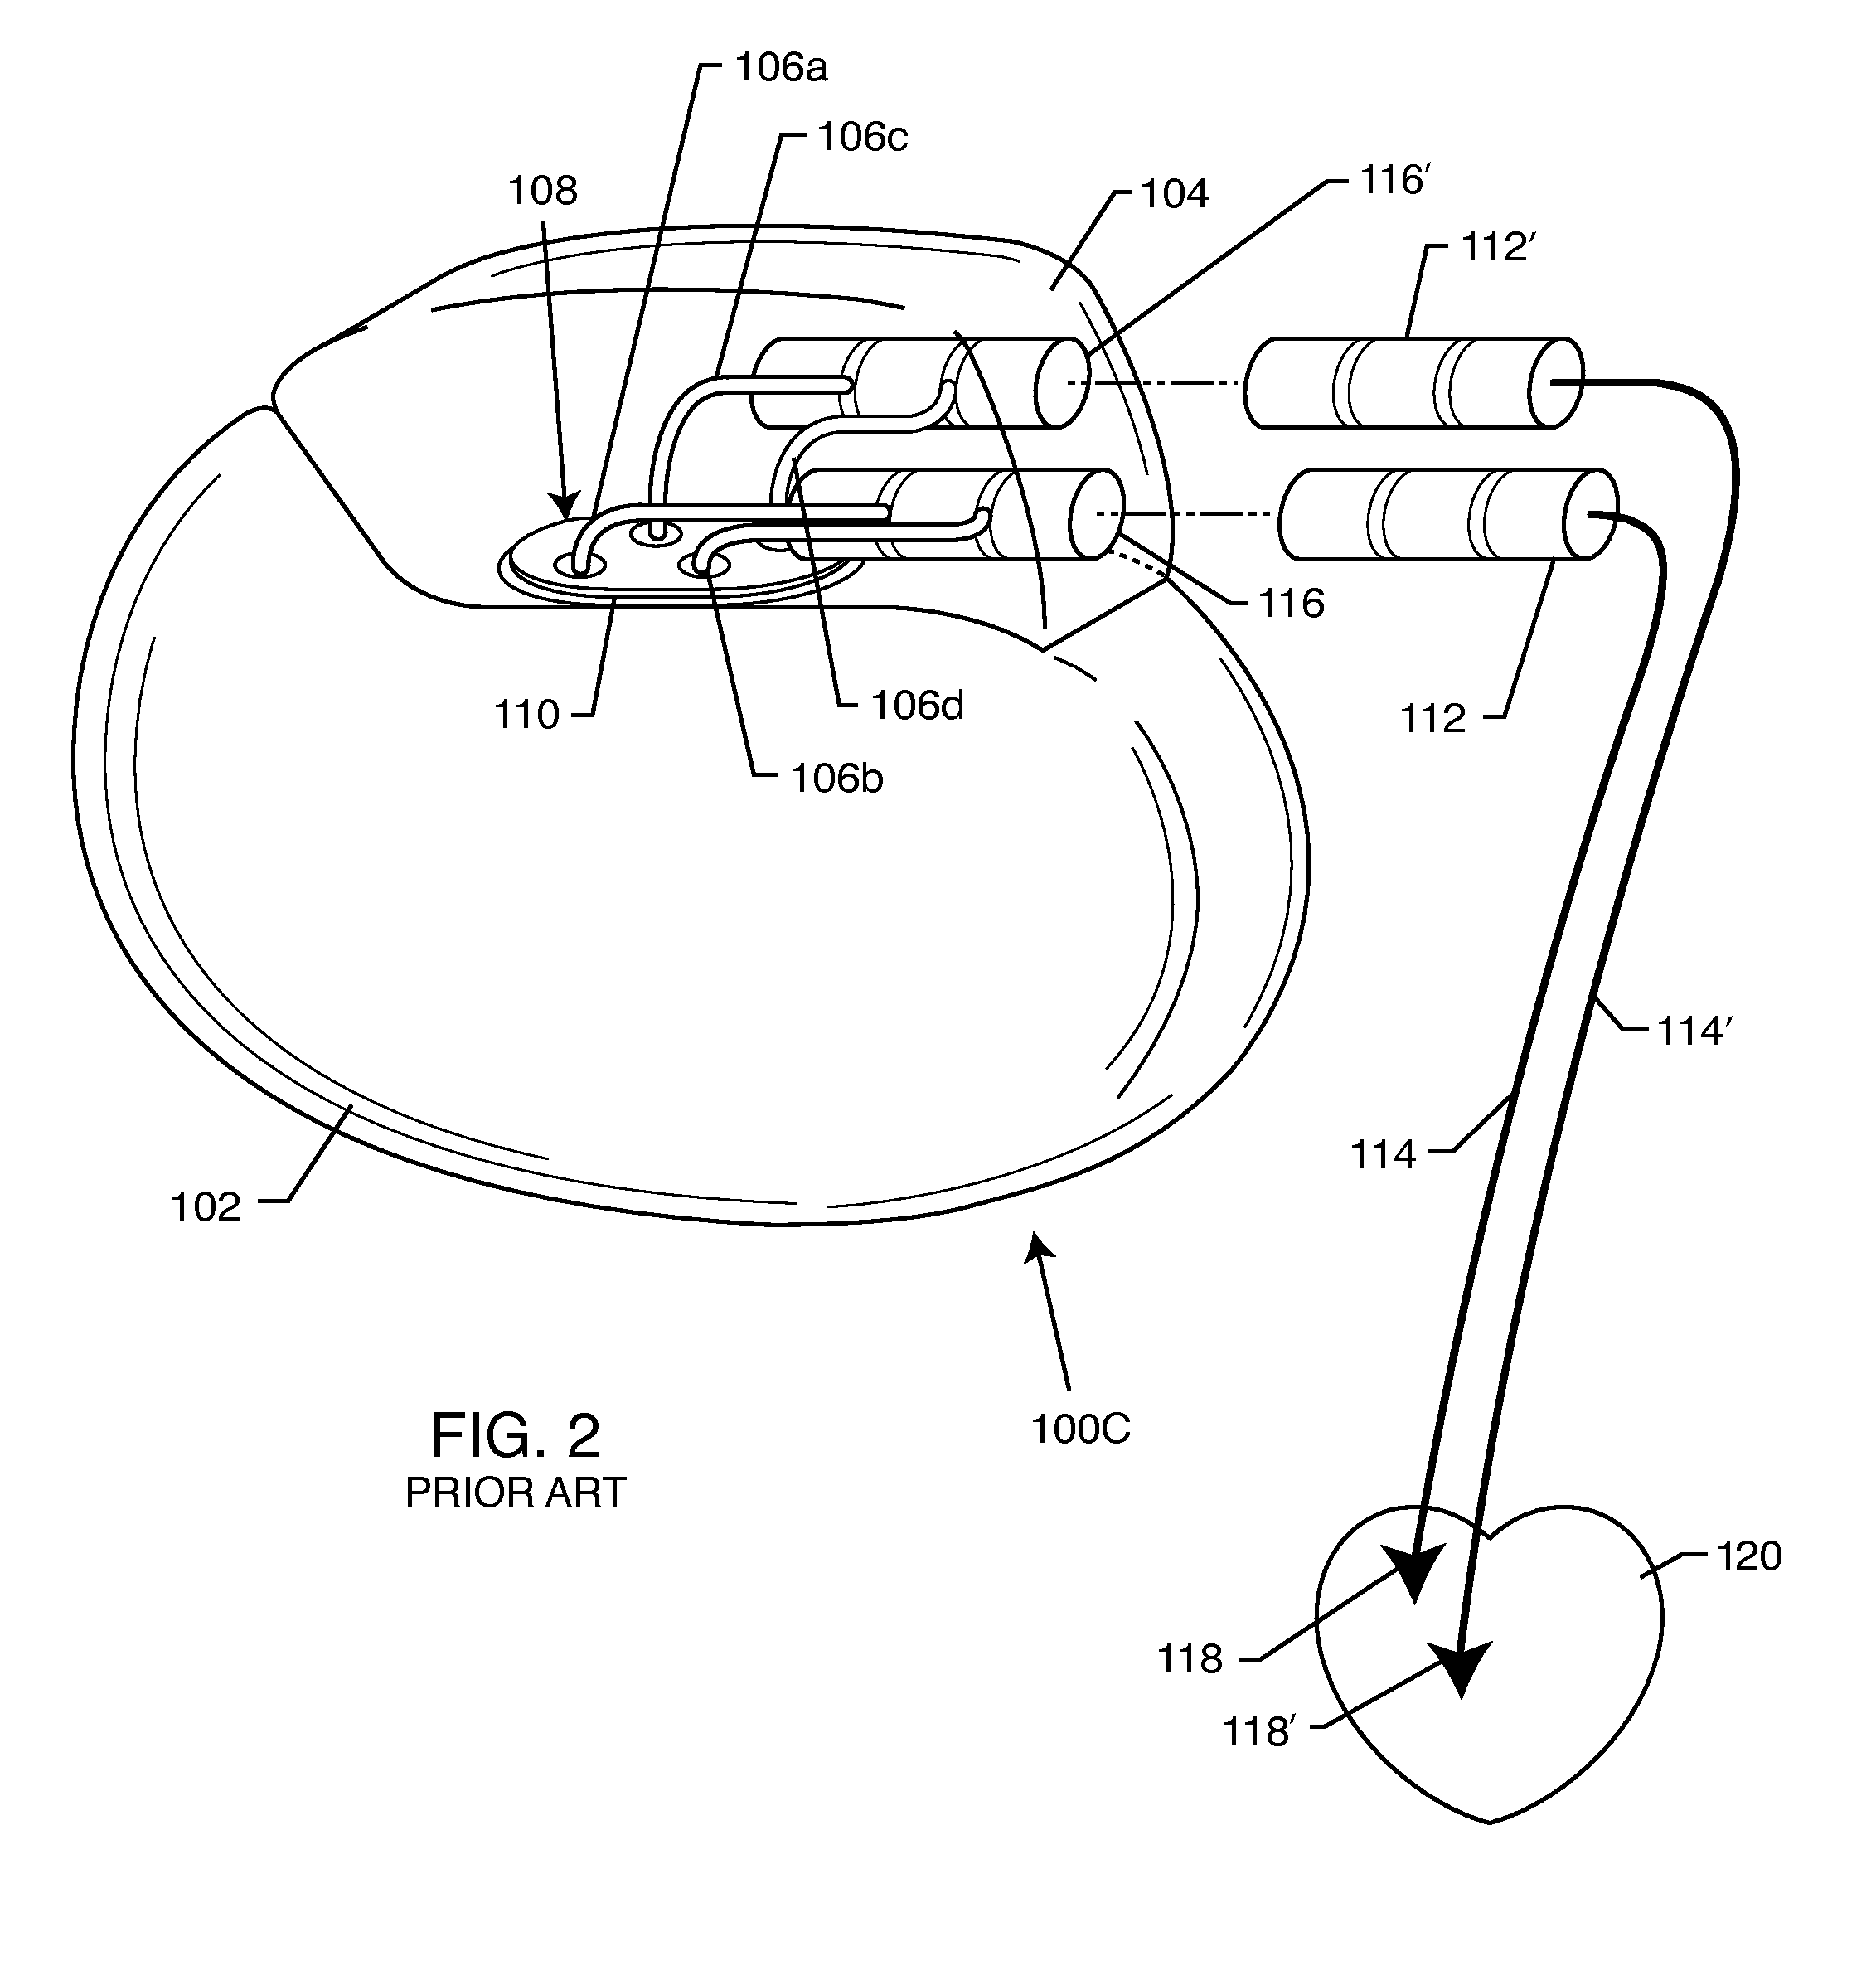 Shielded network for an active medical device implantable lead